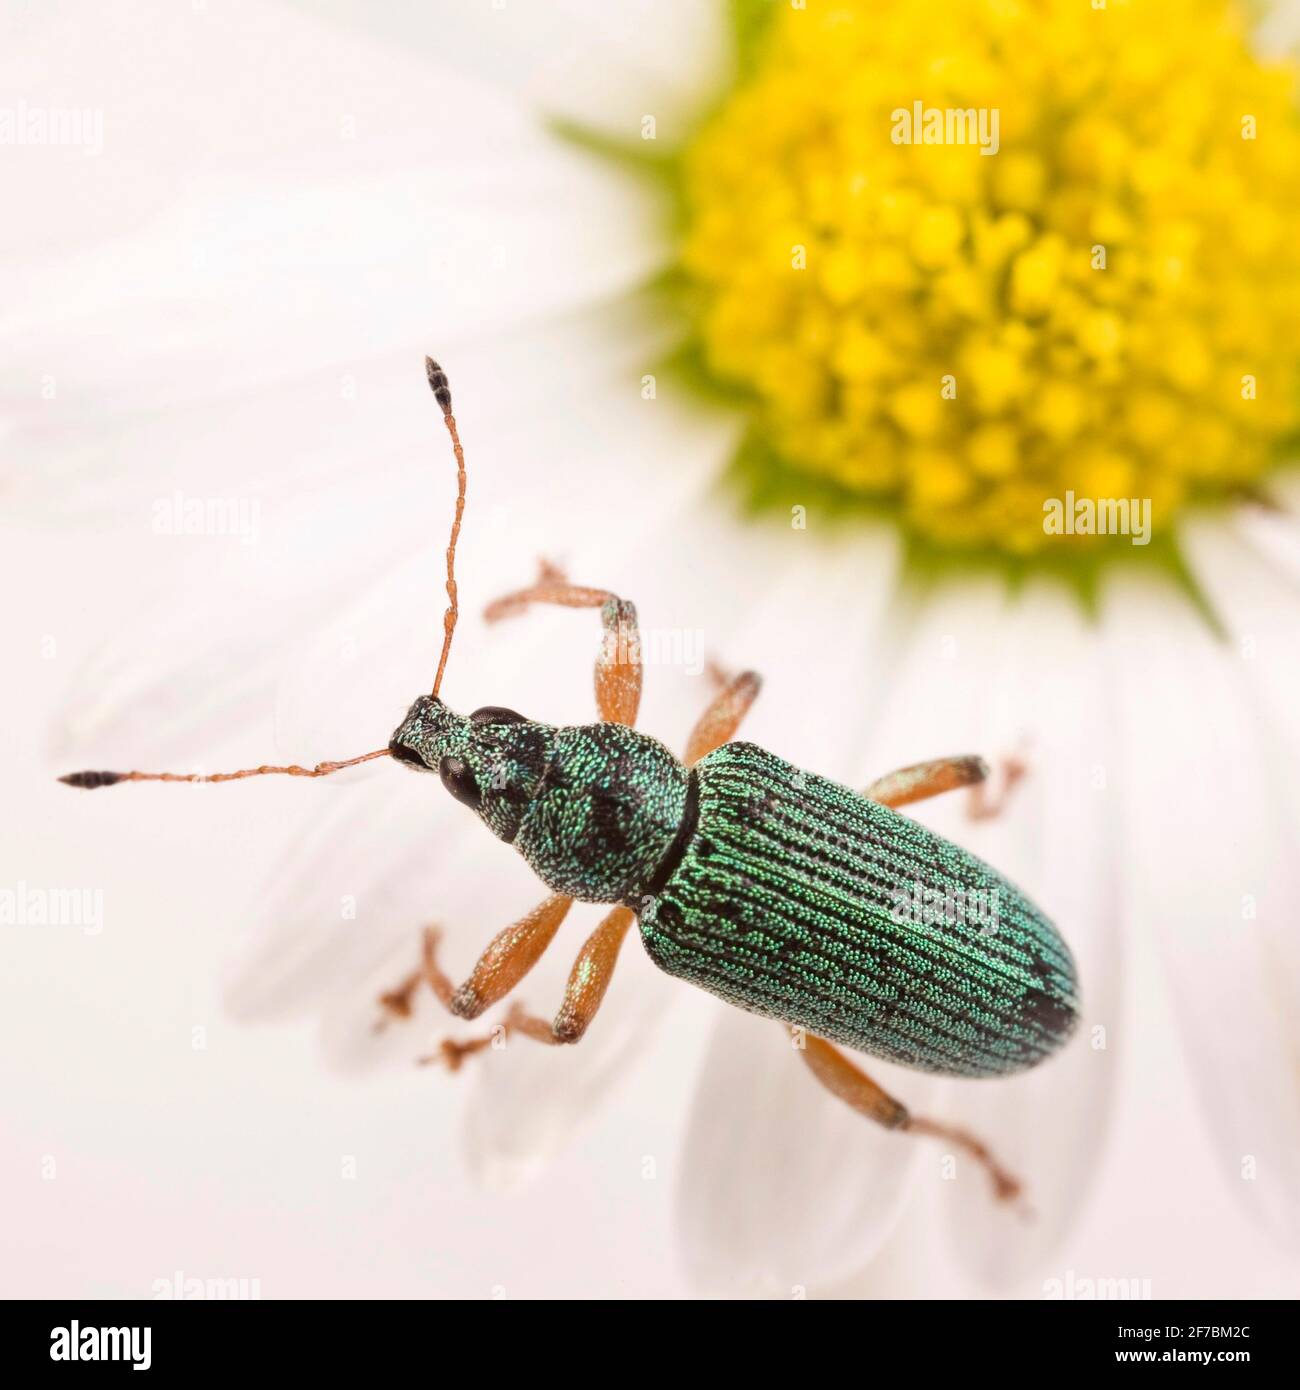 broad-nosed weevil (Polydrusus formosus, Polydrusus sericeus), sits on a daisy, Austria Stock Photo